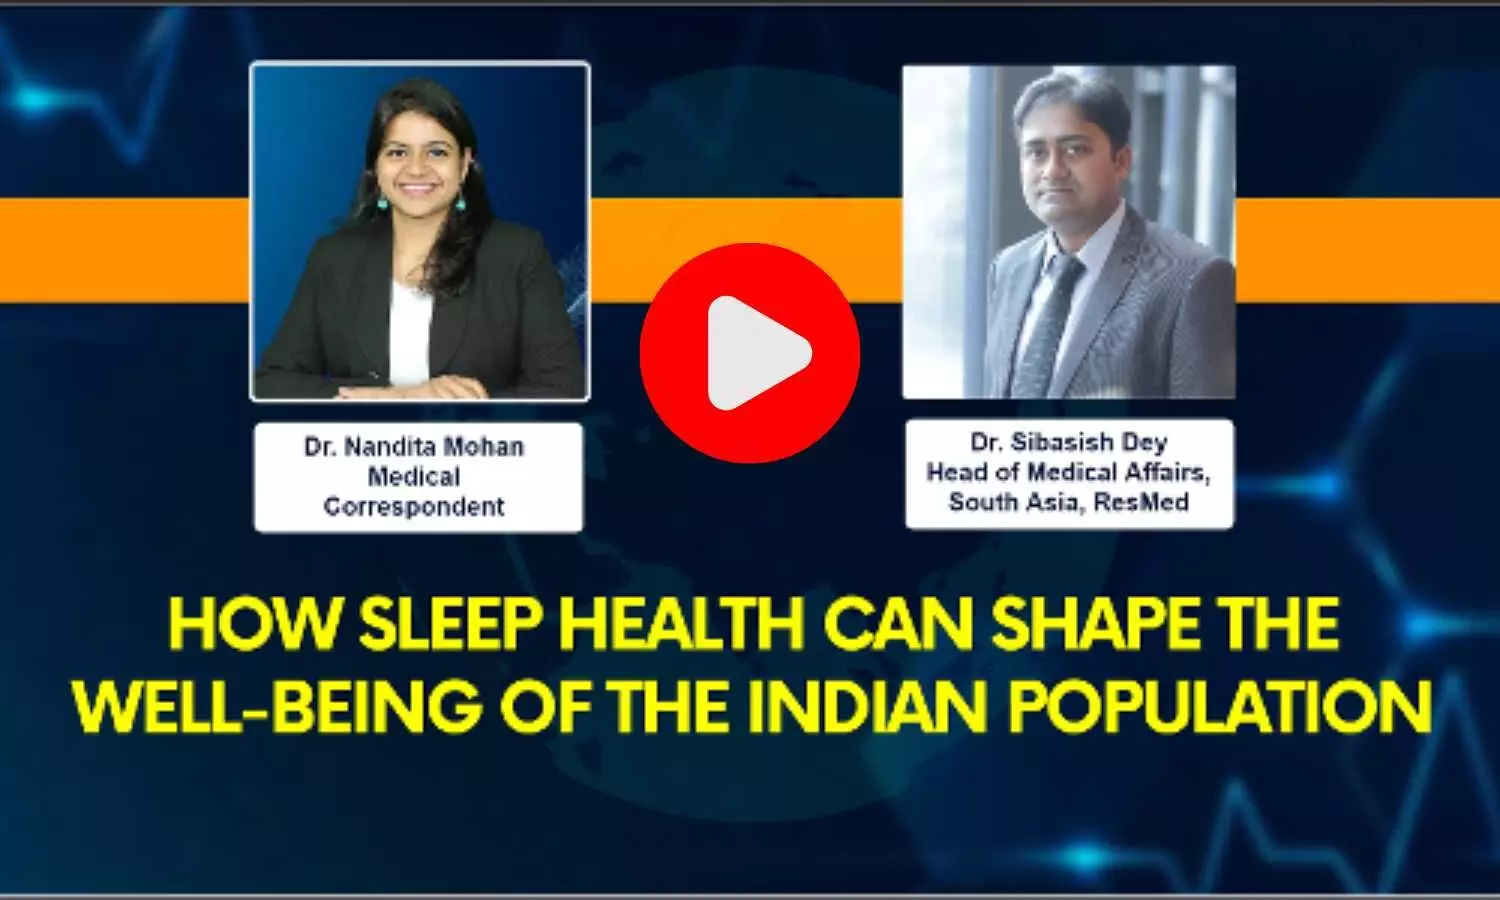 How sleep health can shape well being of Indian population Ft Dr Sibasish Dey